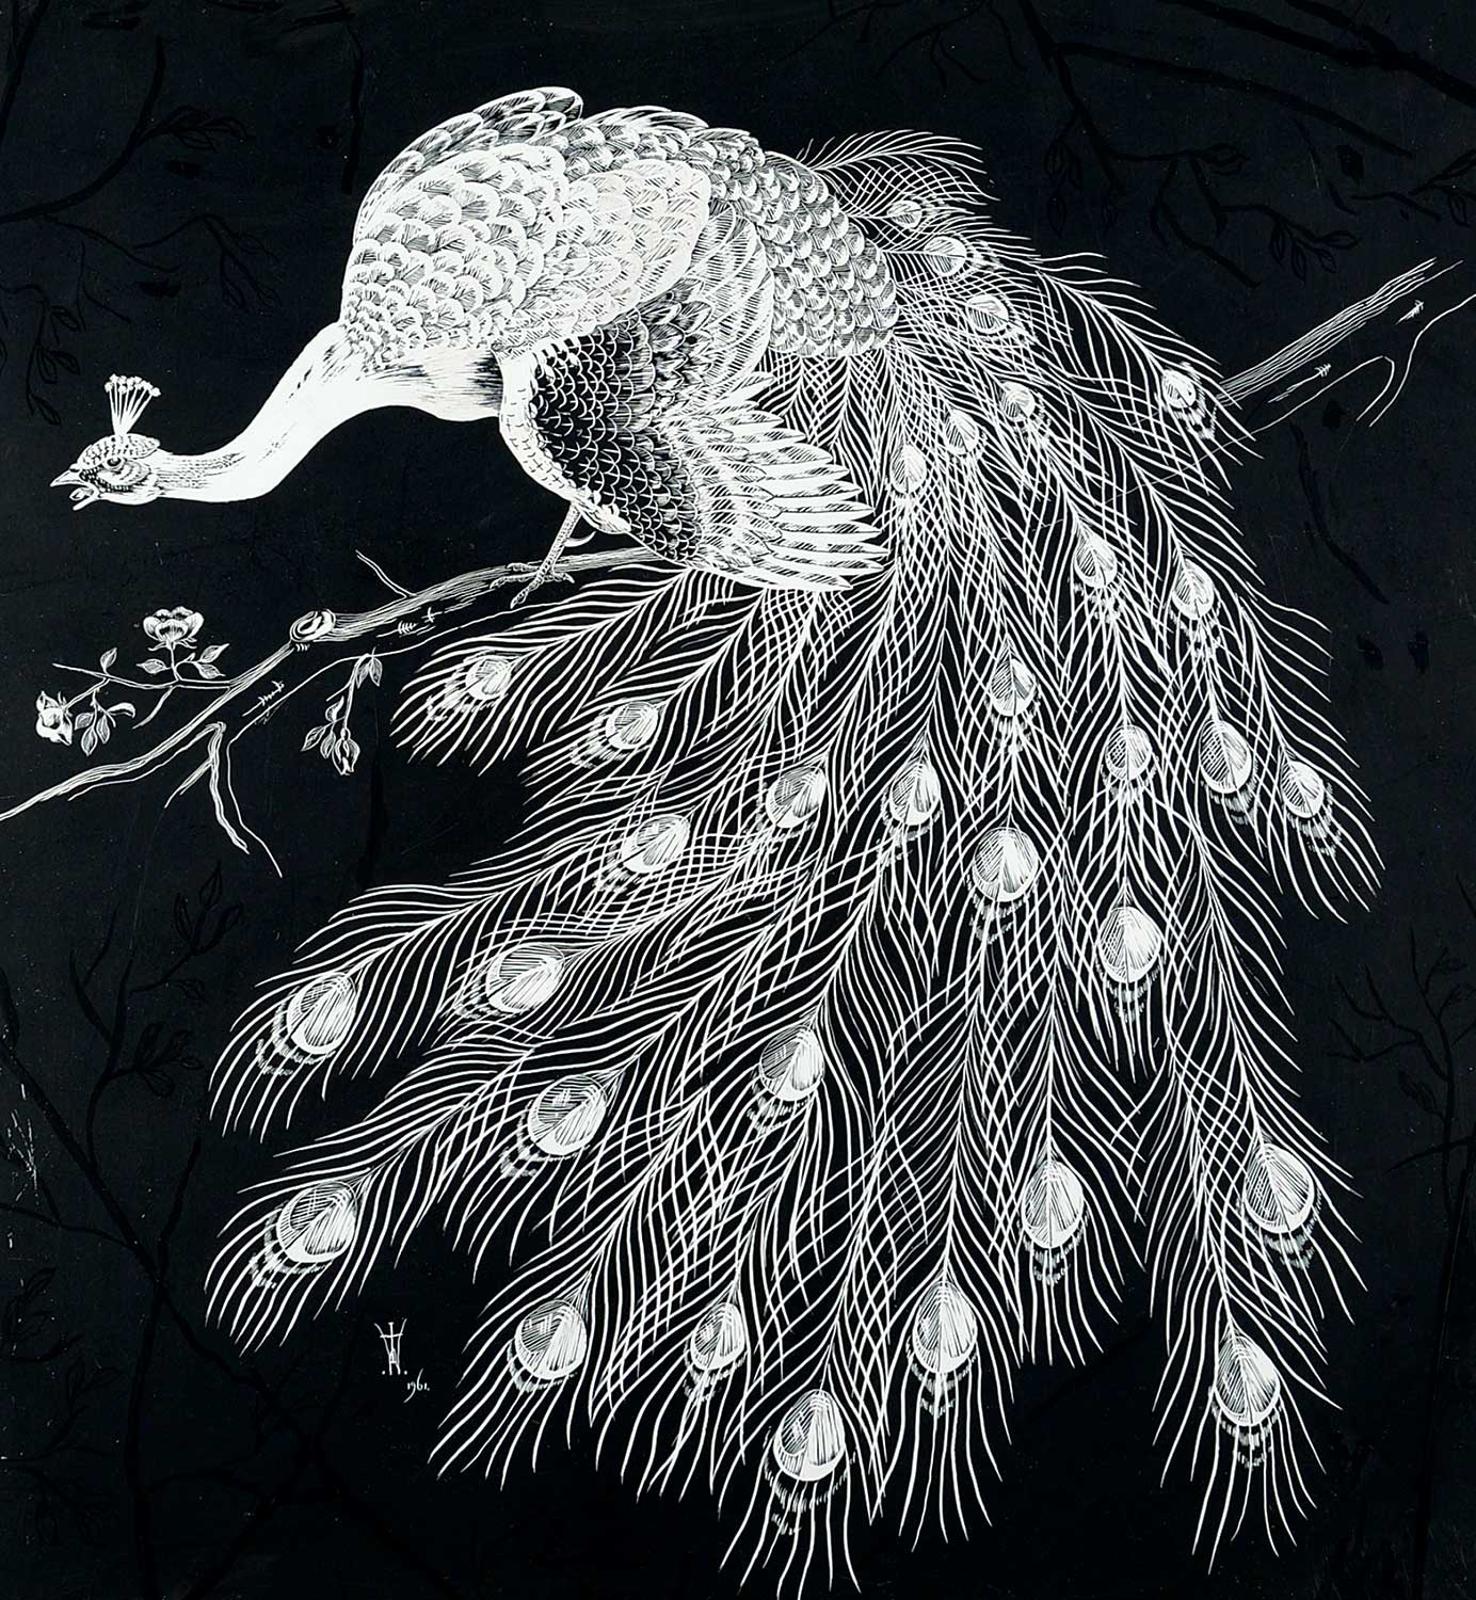 Tristan Walcot - Untitled - Peacock